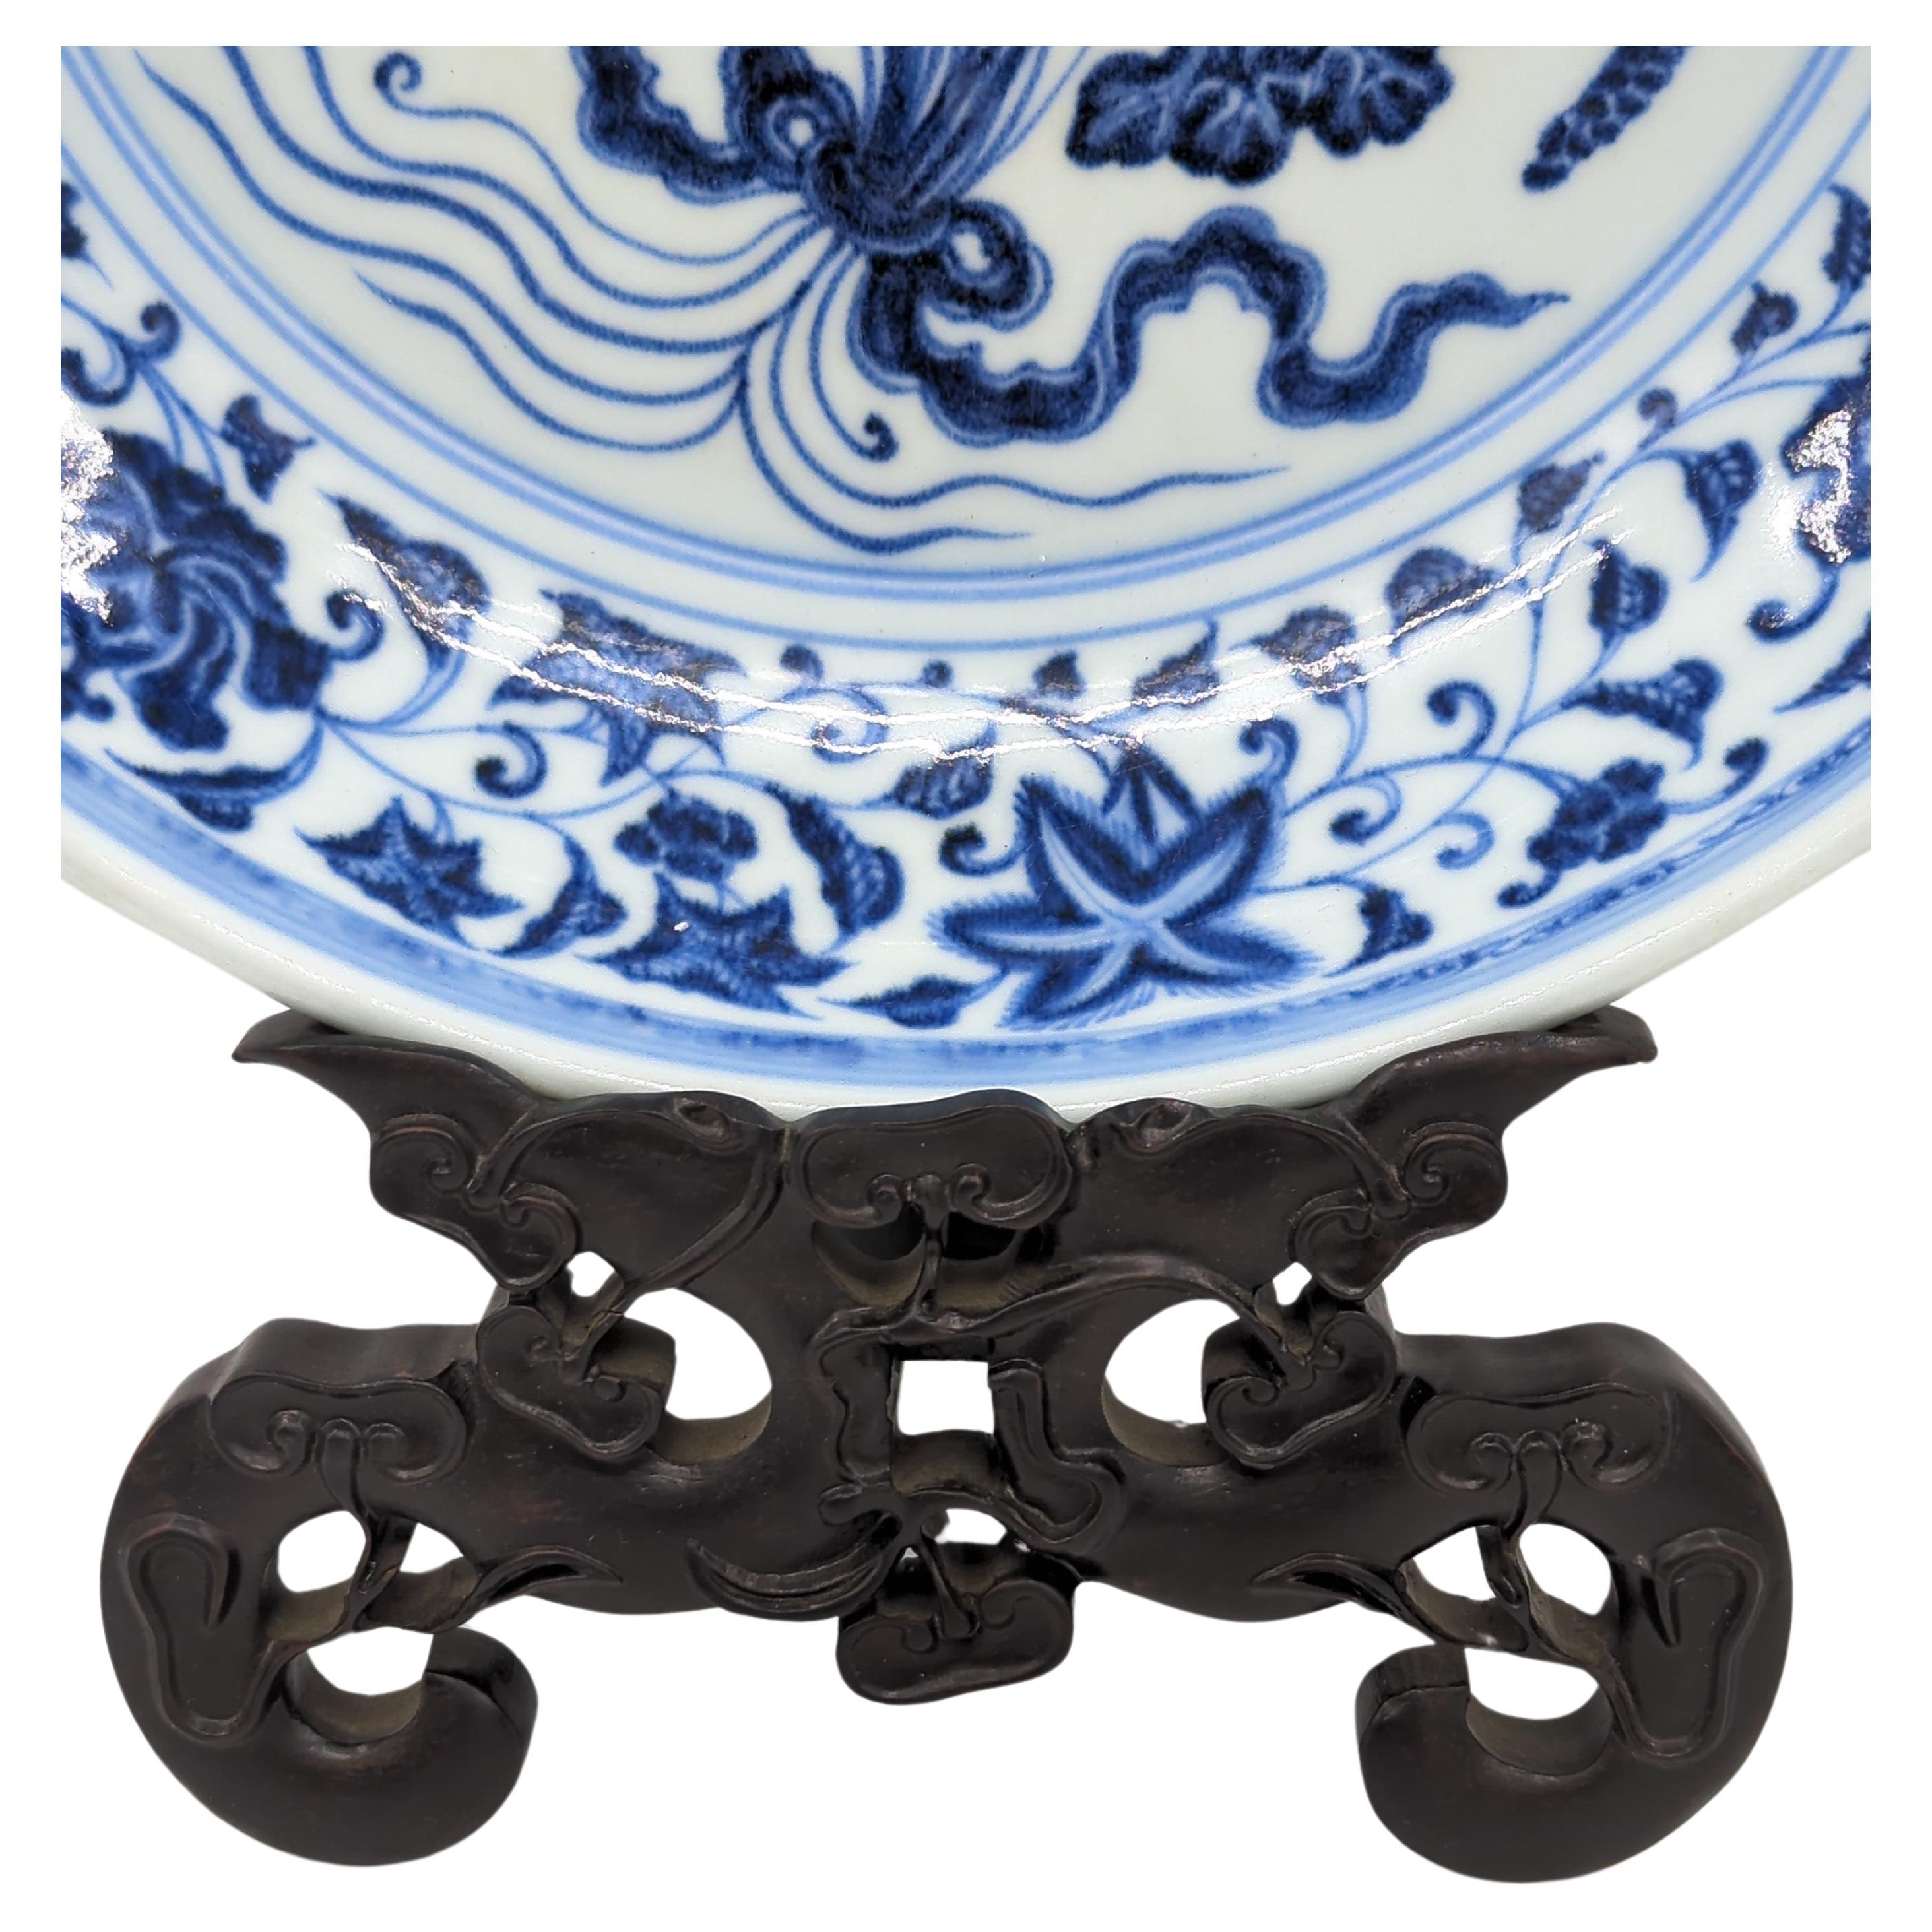 An antique Chinese porcelain charger, hand decorated in underglaze blue and white, exemplifying the revered Ming style. The focal point, a central medallion within a double circle border, showcases a bunch of lotus flowers bound by a flowing ribbon,